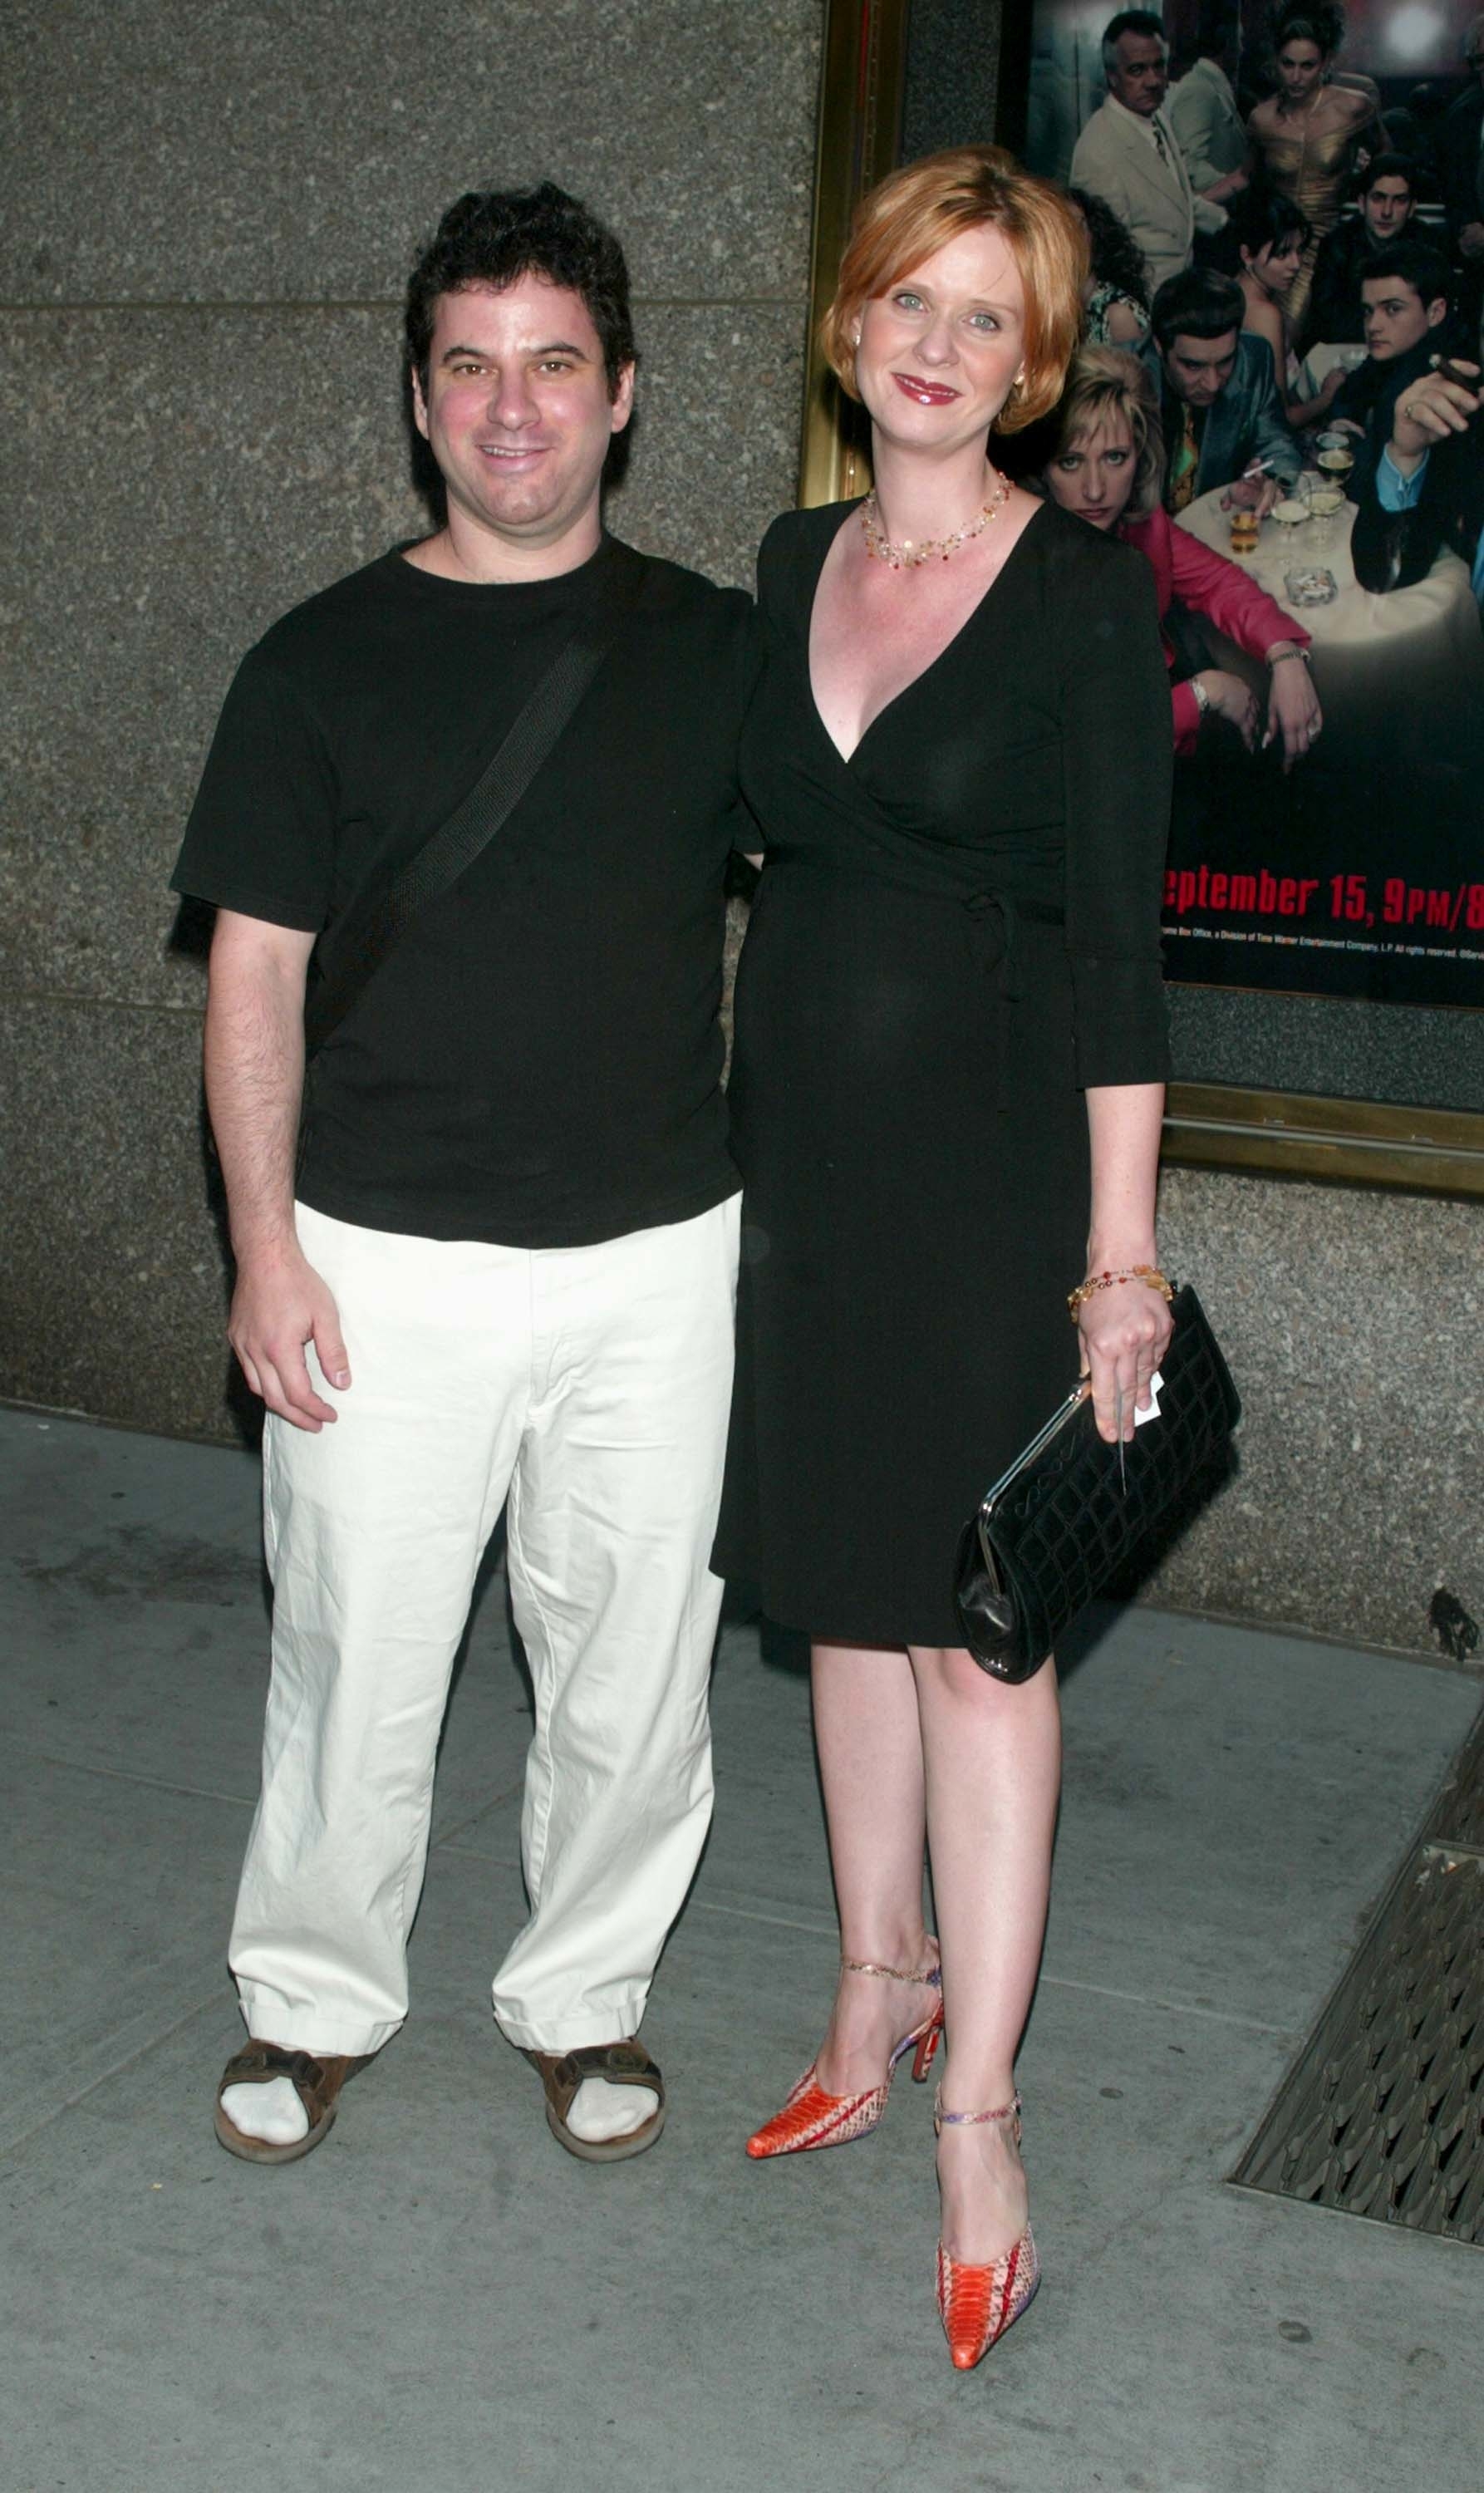 Danny in a black top and white pants, and Cynthia in a black dress with a V-neckline and orange shoes